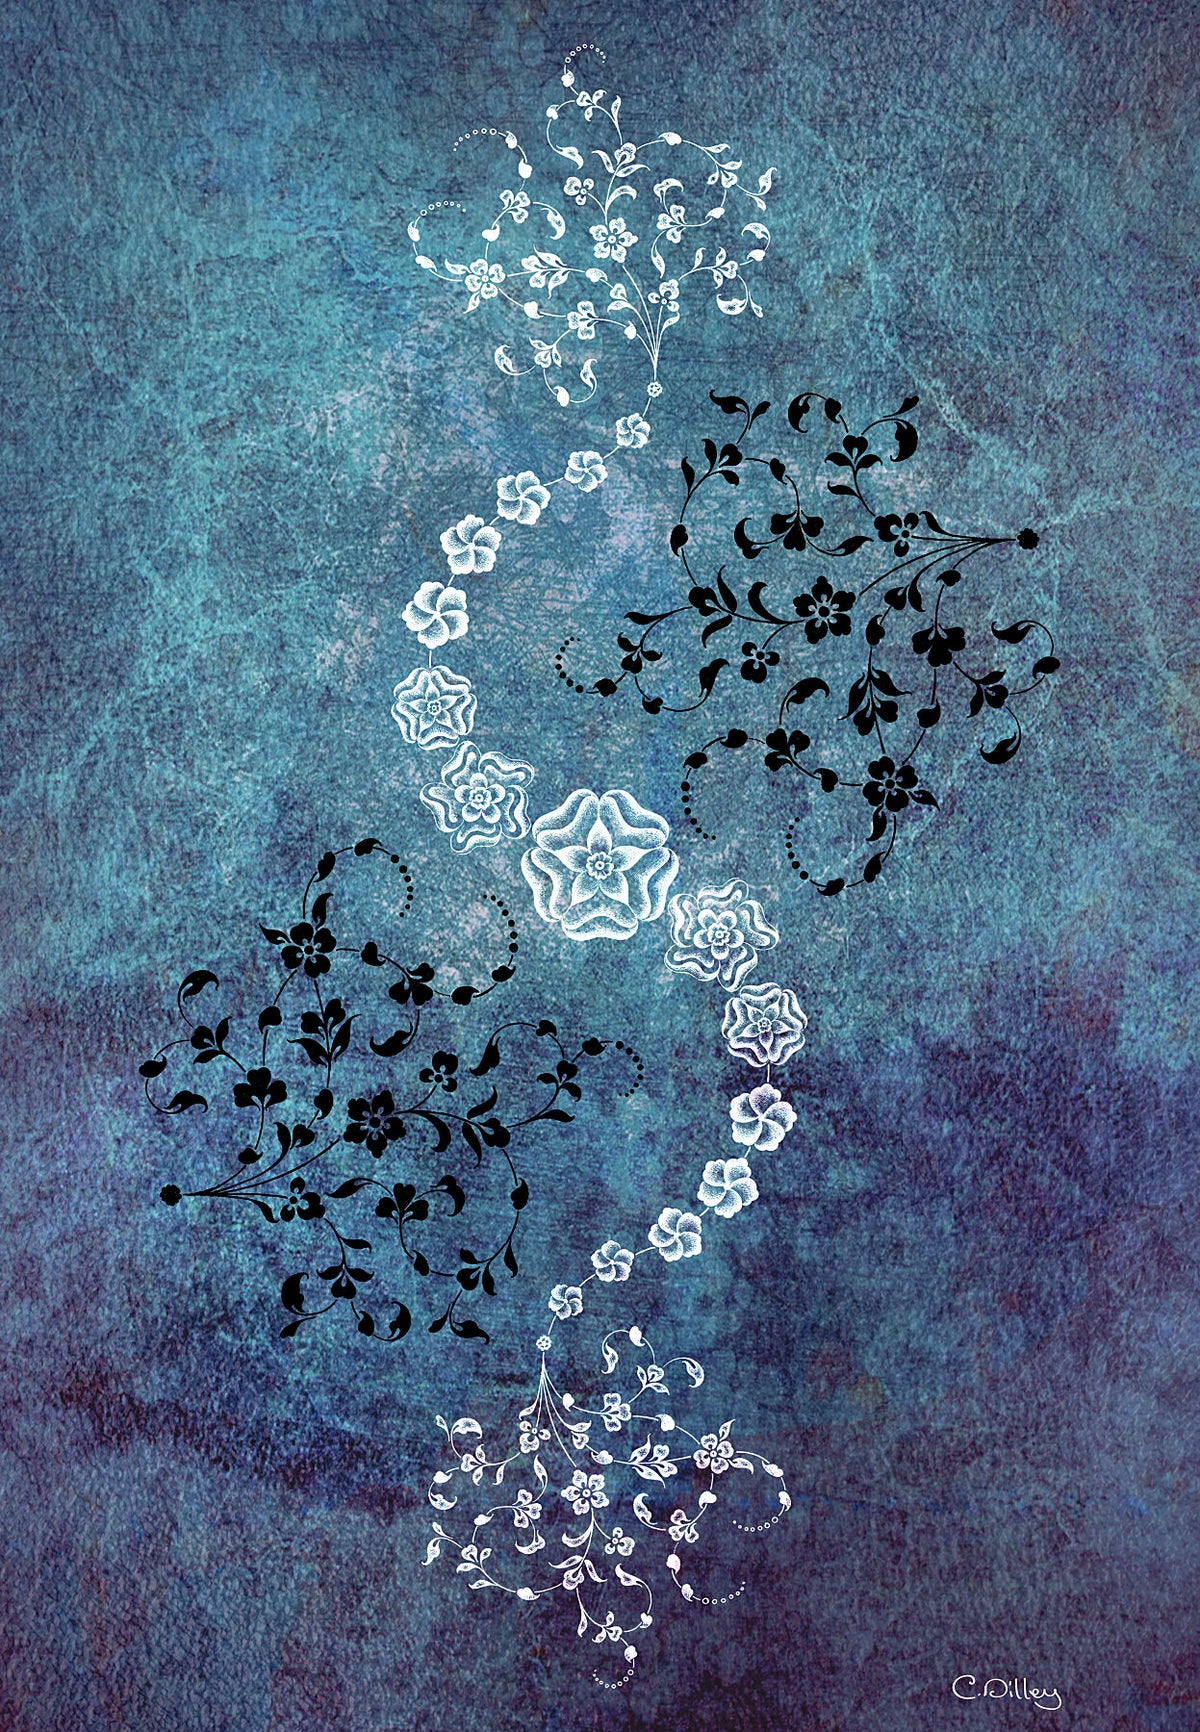 Elegant art print of spiralling floral sprays sapphire tones and white and black accents